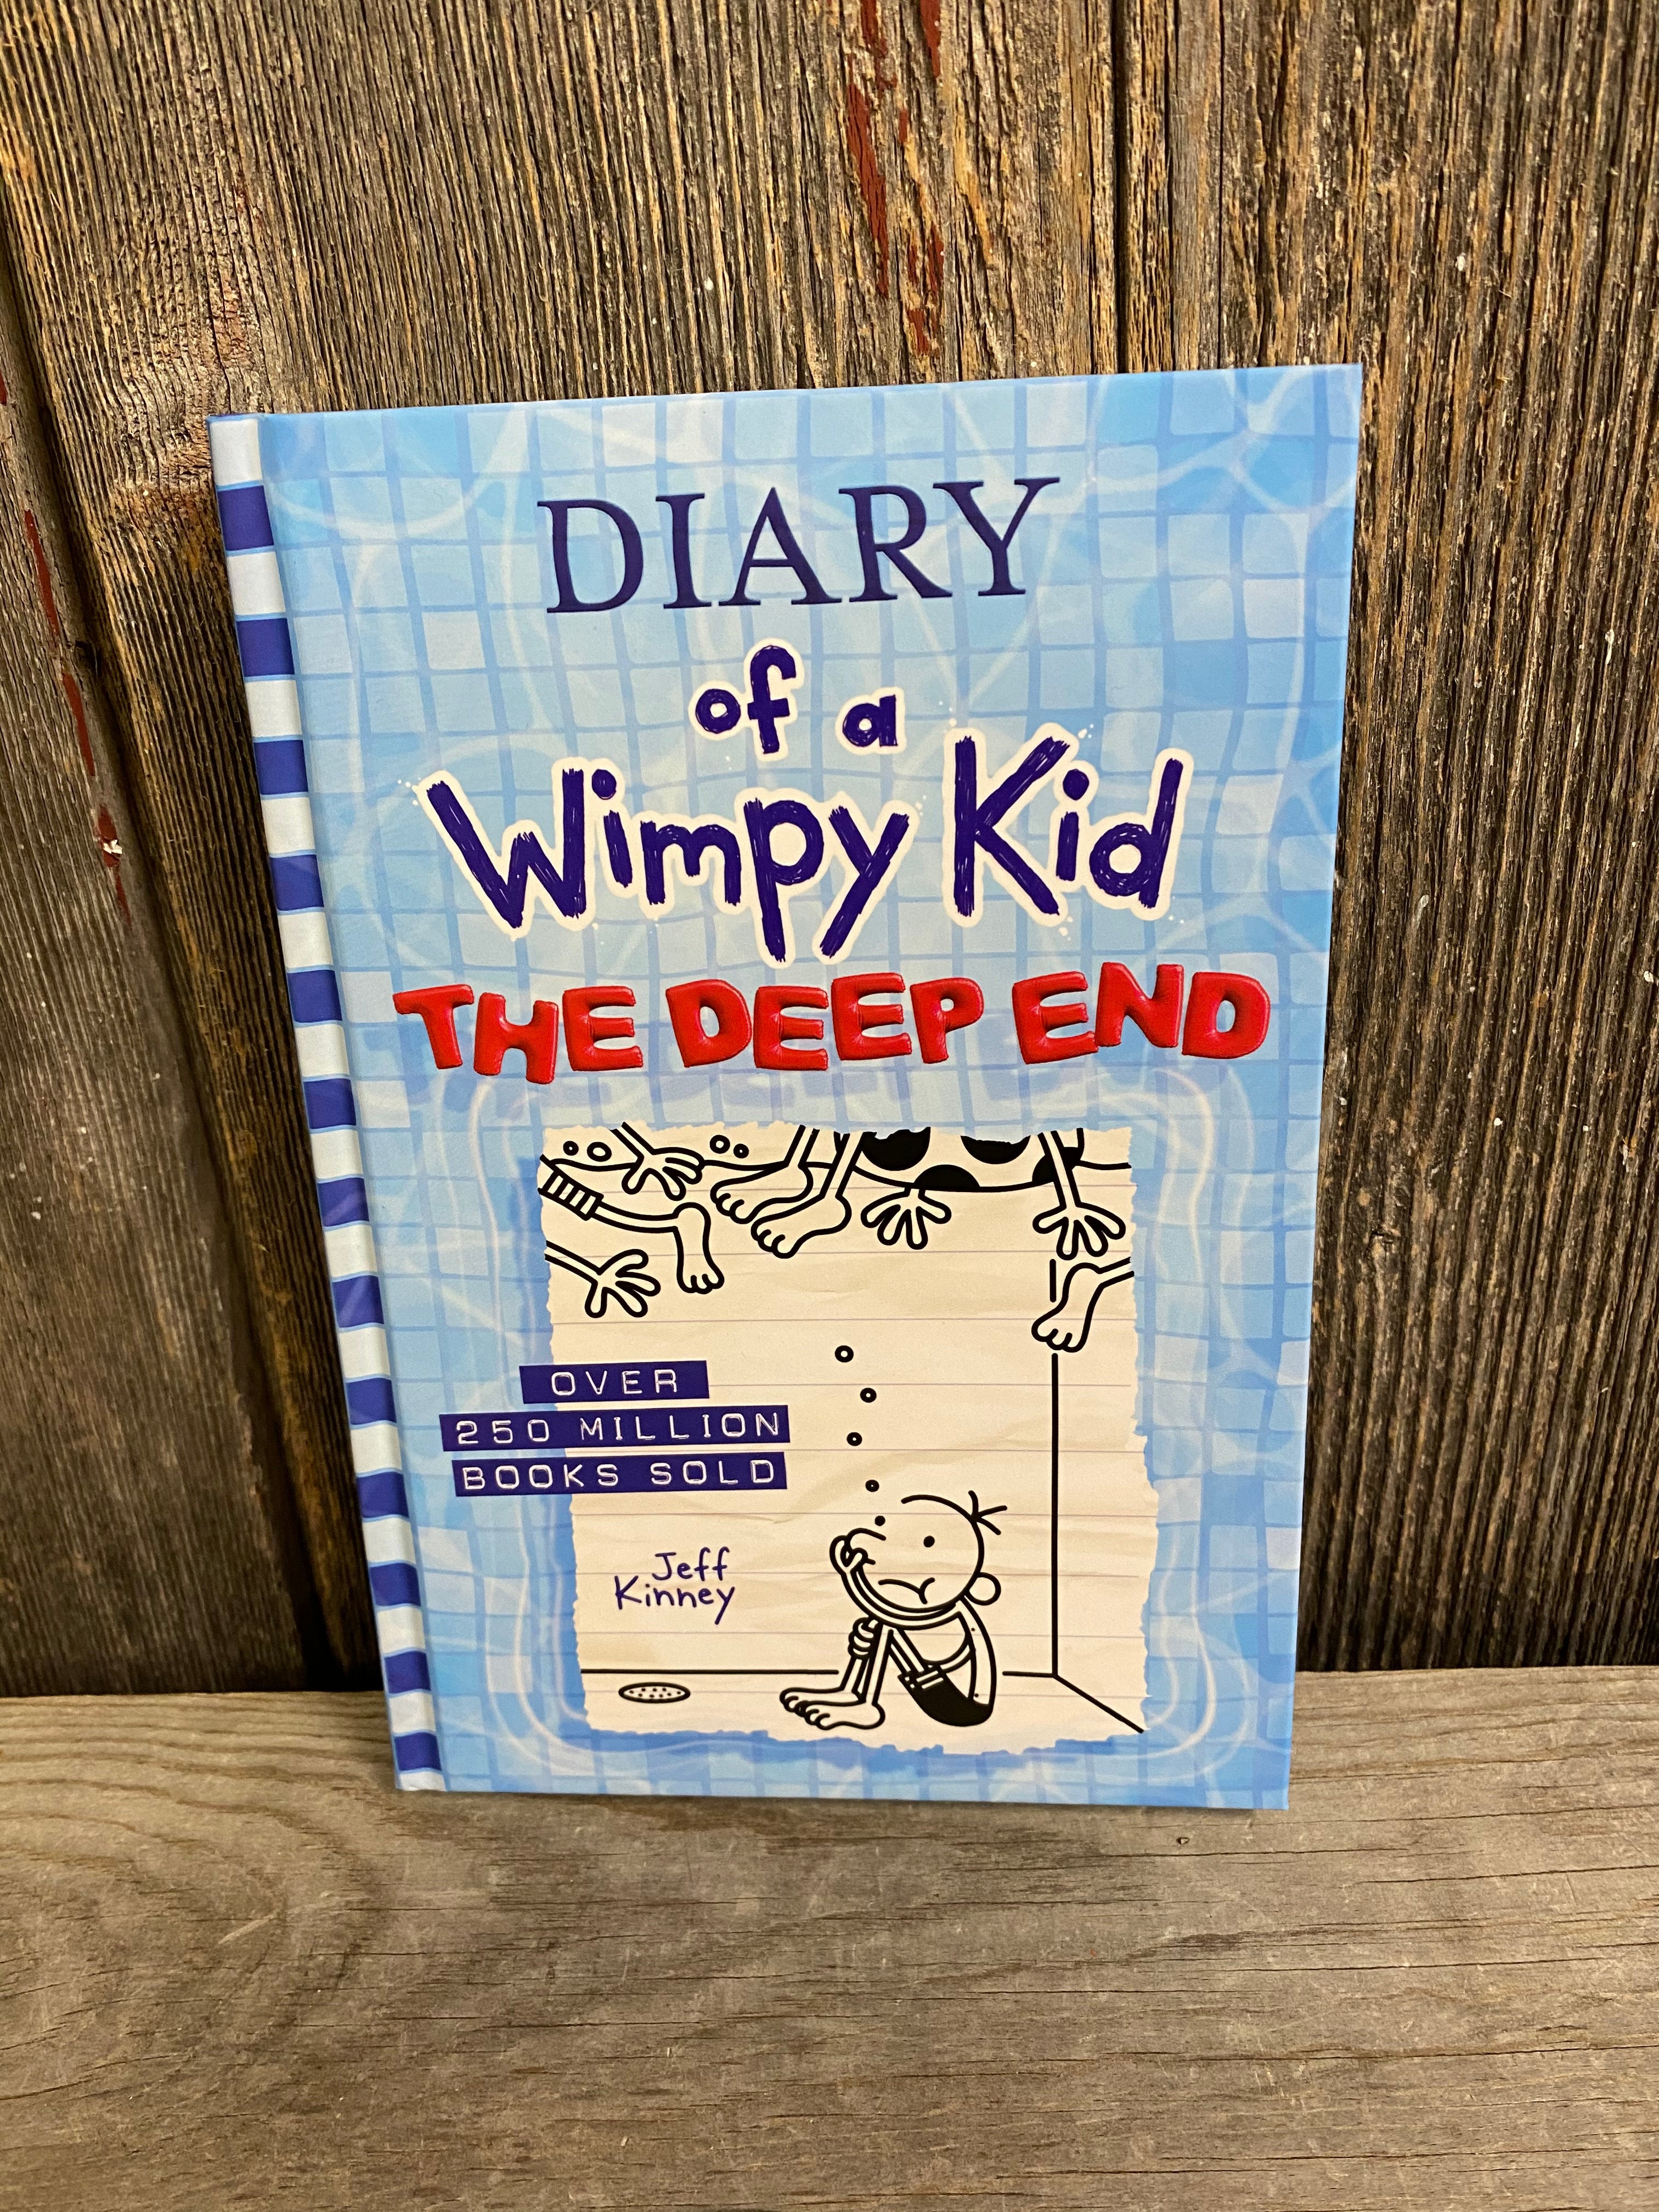 Kid　a　#15　Deep　Diary　Main　Whimsy　Wimpy　of　End　The　On